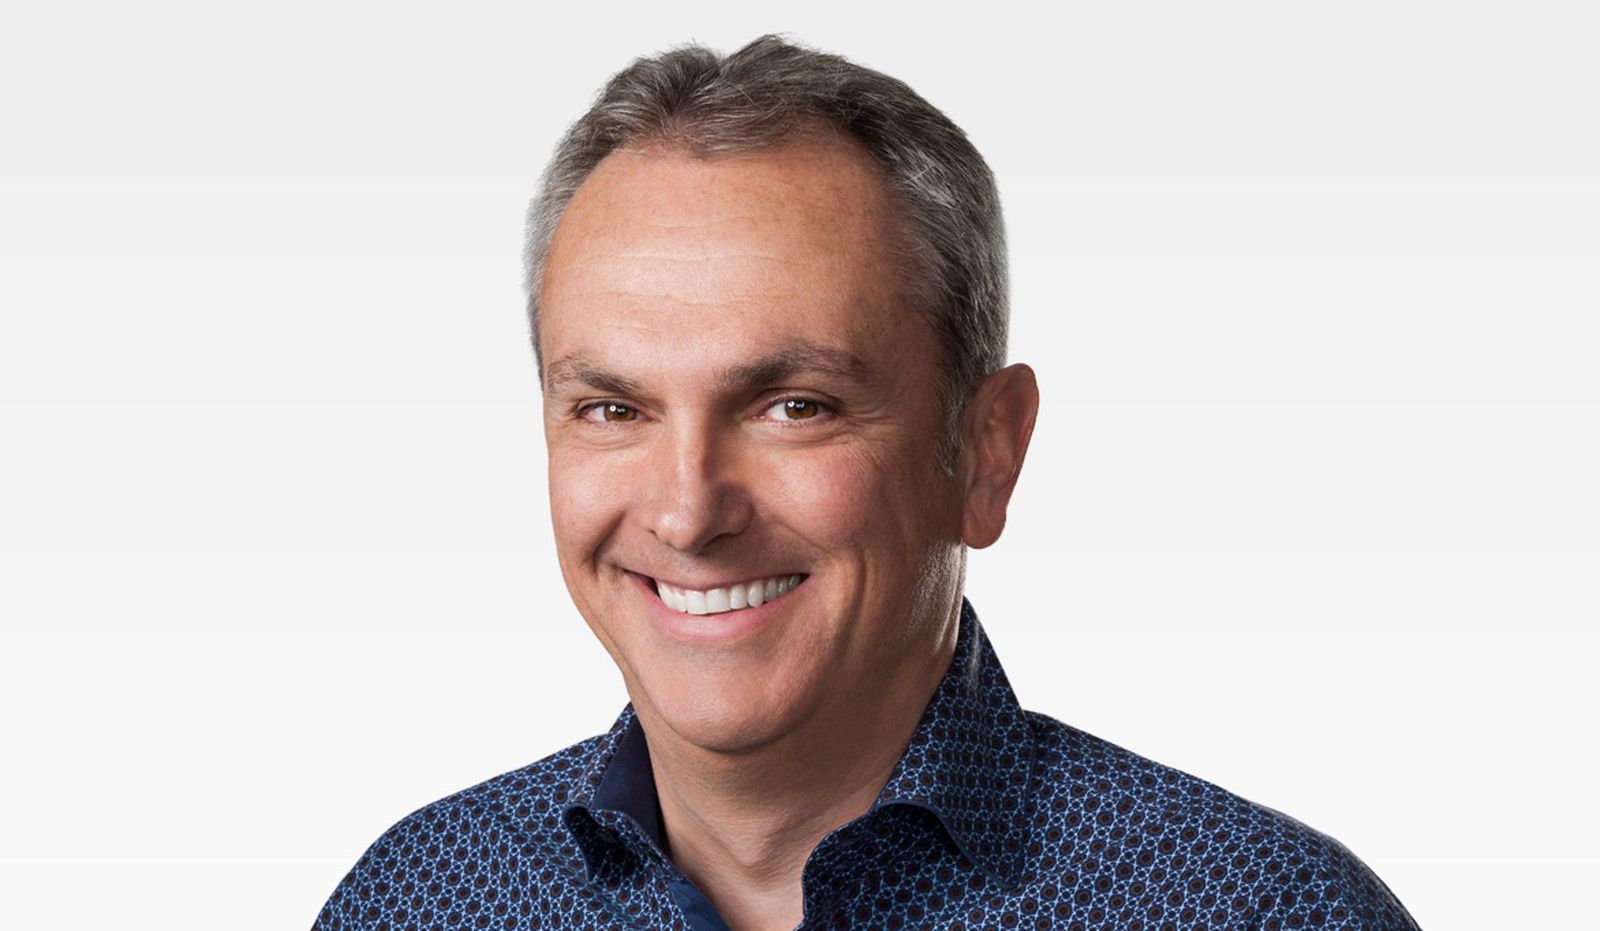 Apple's Financial Chief Luca Maestri Sells Apple Shares Worth Over $16 Million